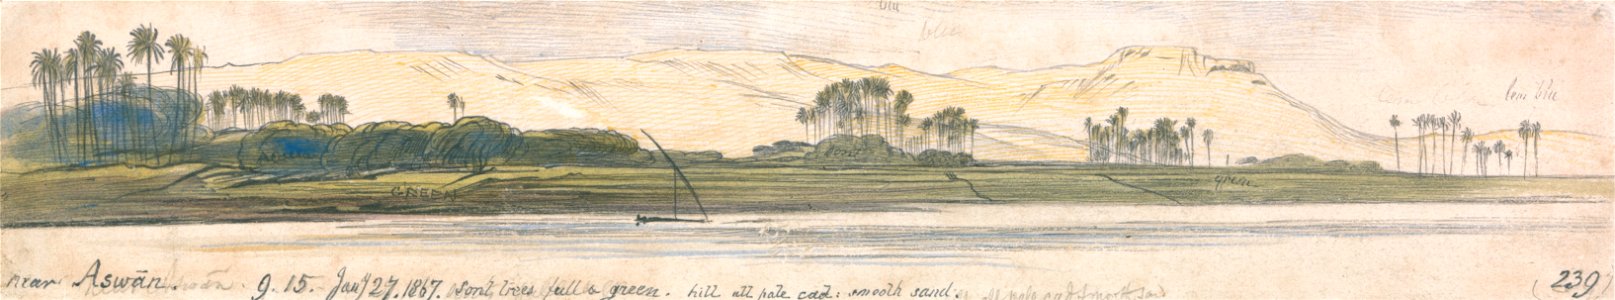 Edward Lear - Near Aswan - Google Art Project. Free illustration for personal and commercial use.